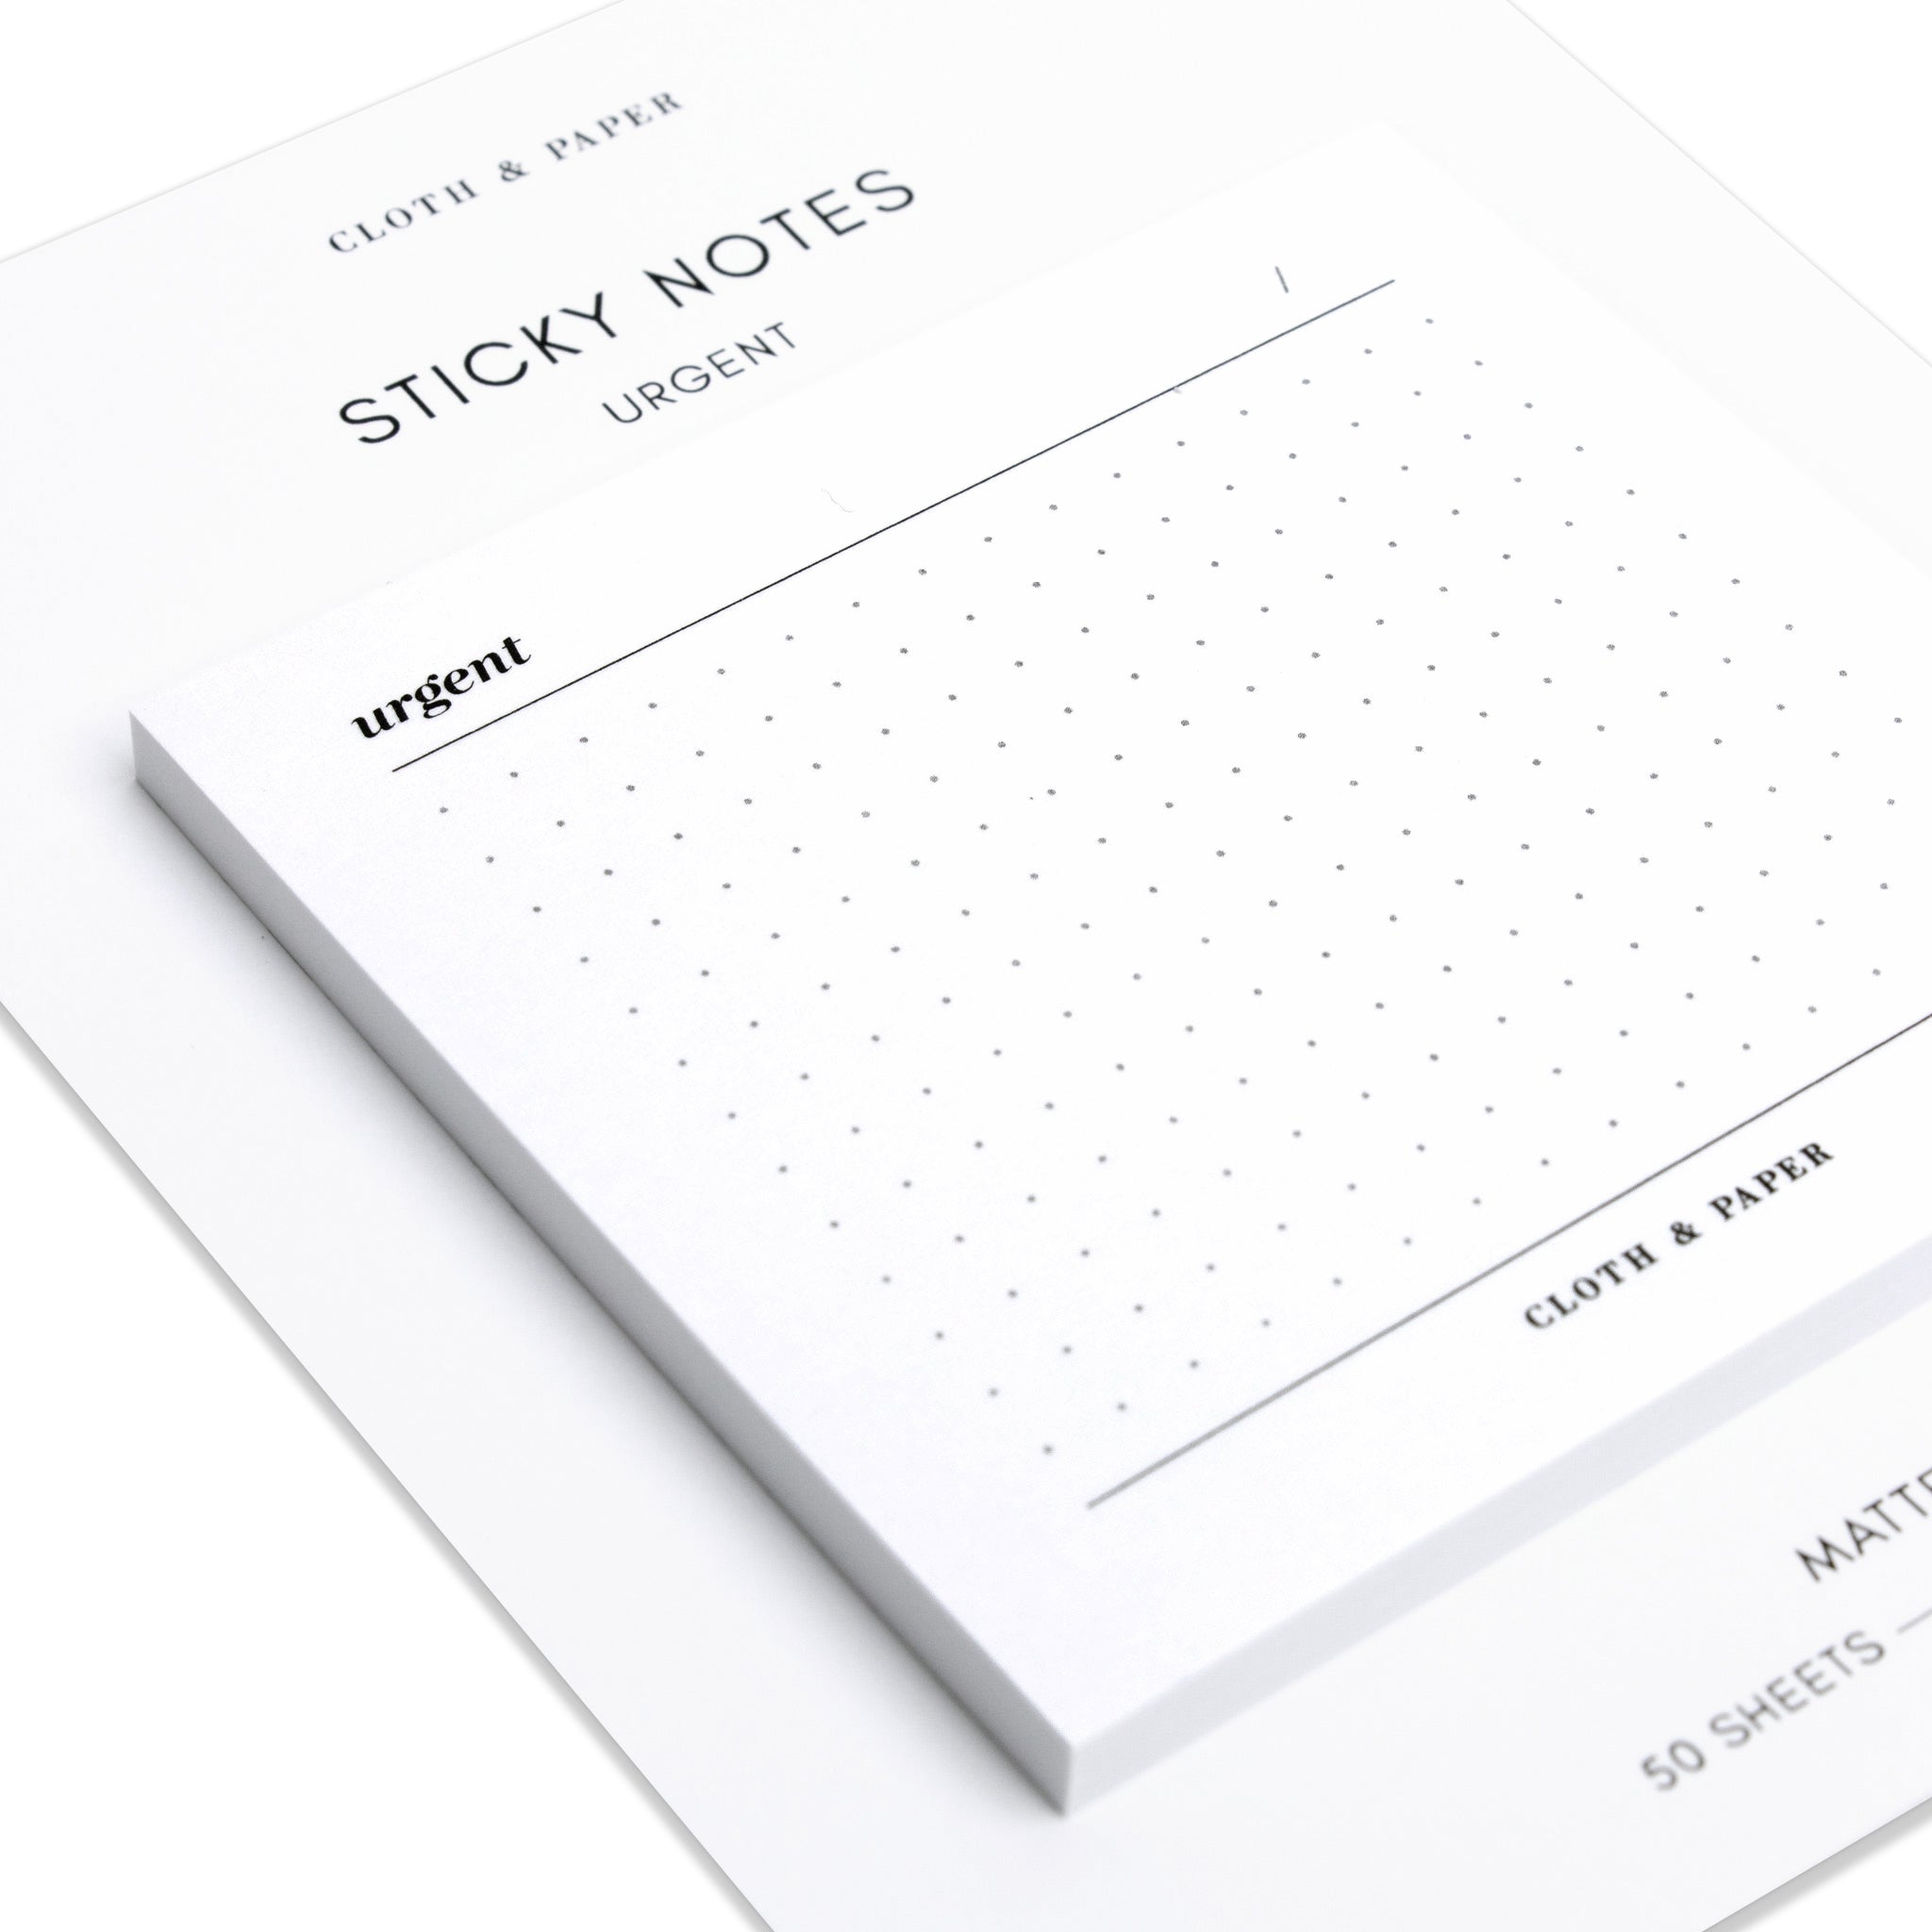 White Mini Sticky Notes - Planner Supplies - Planning/Journaling - Sticky  Notes - Planner Accessories - Minimal